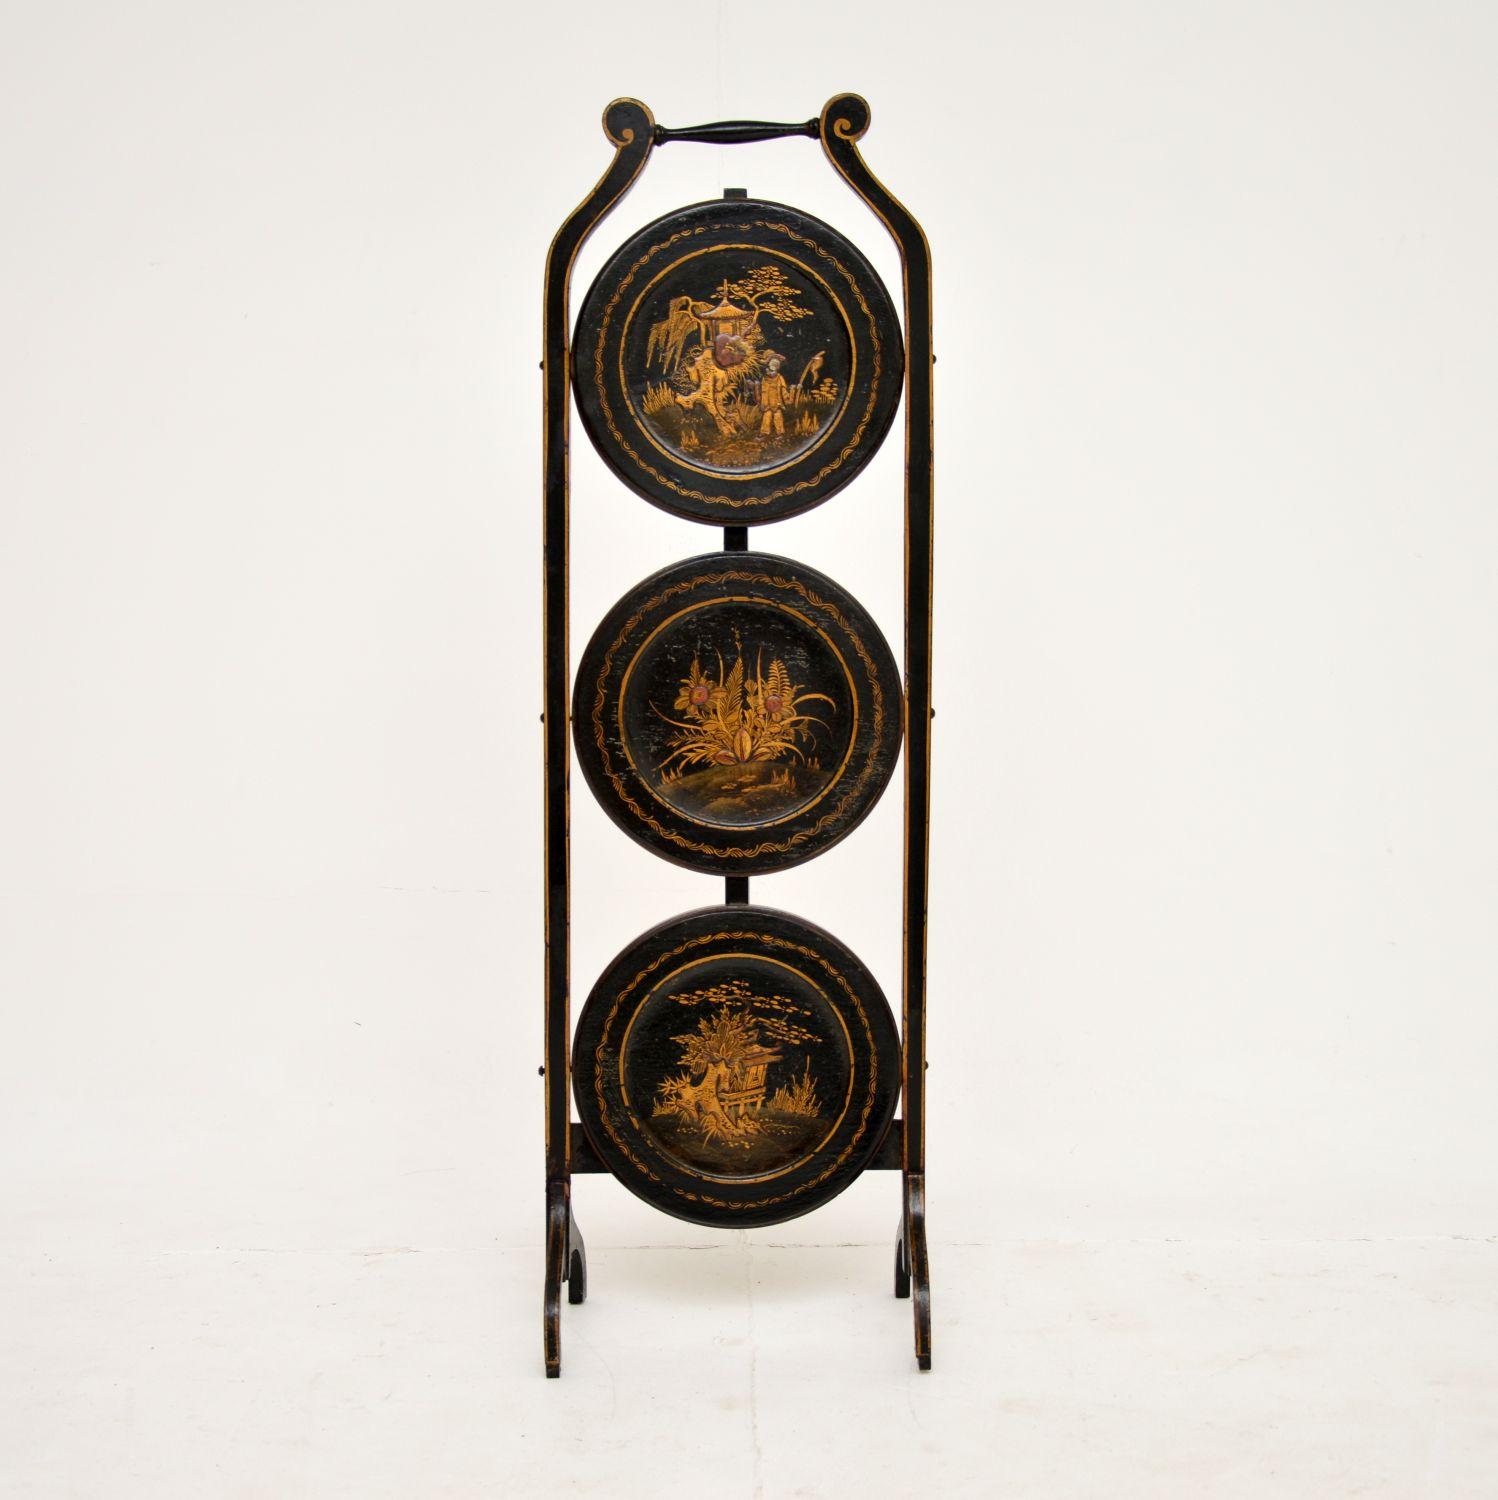 A beautiful and rare antique lacquered chinoiserie cake stand. This was made in England, it dates from the 1900-1920 period.

The quality is excellent, the decorations are beautifully executed and this looks great from all angles.

The condition is